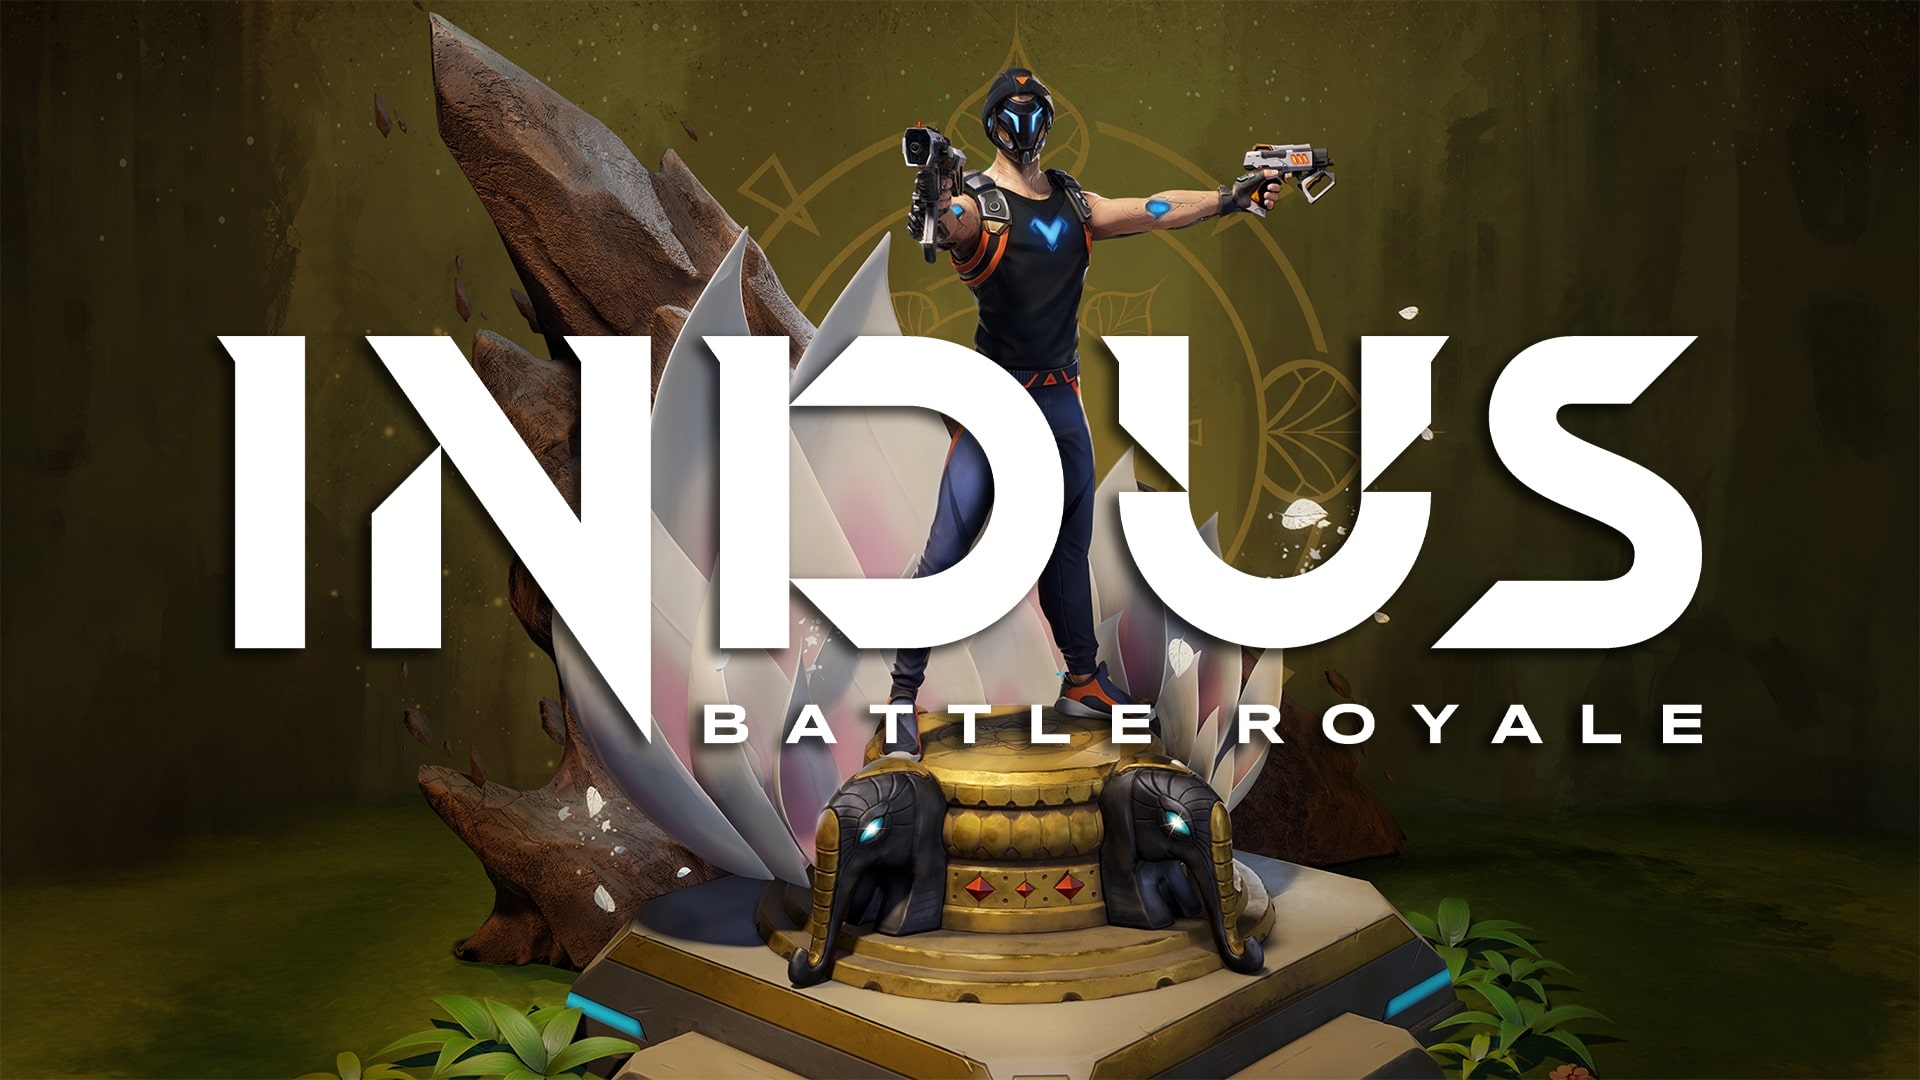 Geek insider, geekinsider, geekinsider. Com,, supergaming reveals indus — an indo-futuristic battle royale for pc, mobile, and consoles, gaming